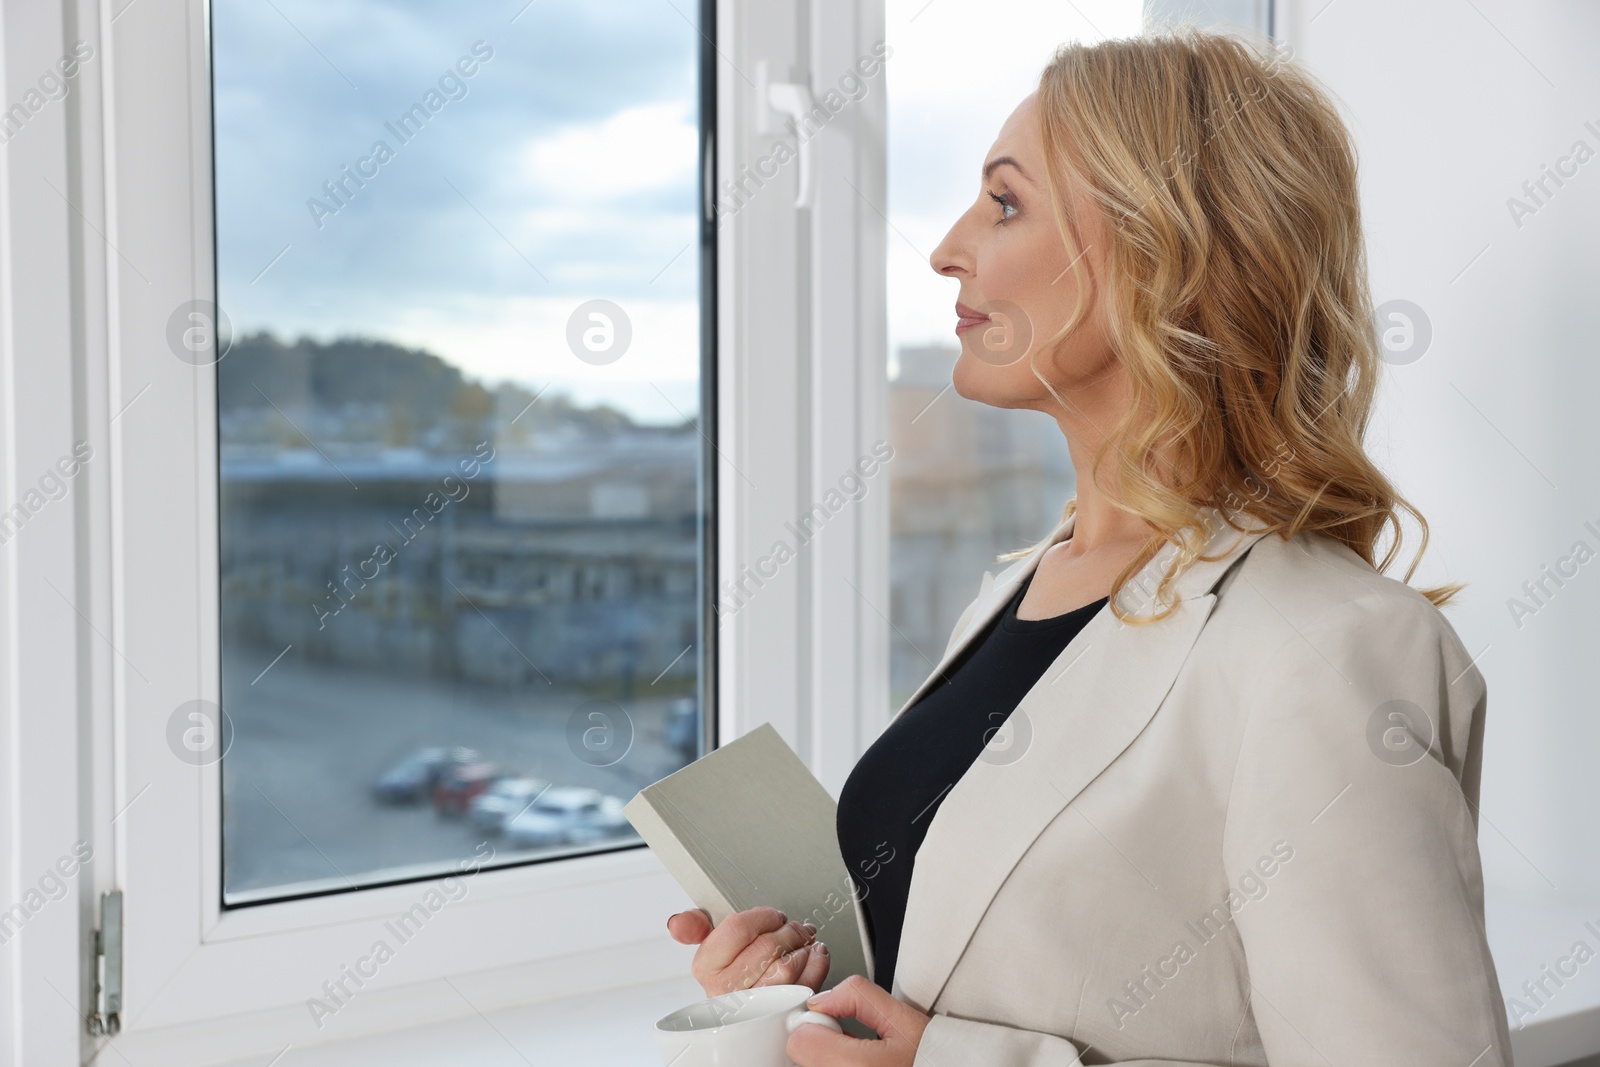 Photo of Lady boss with book and cup of drink near window indoors, space for text. Successful businesswoman